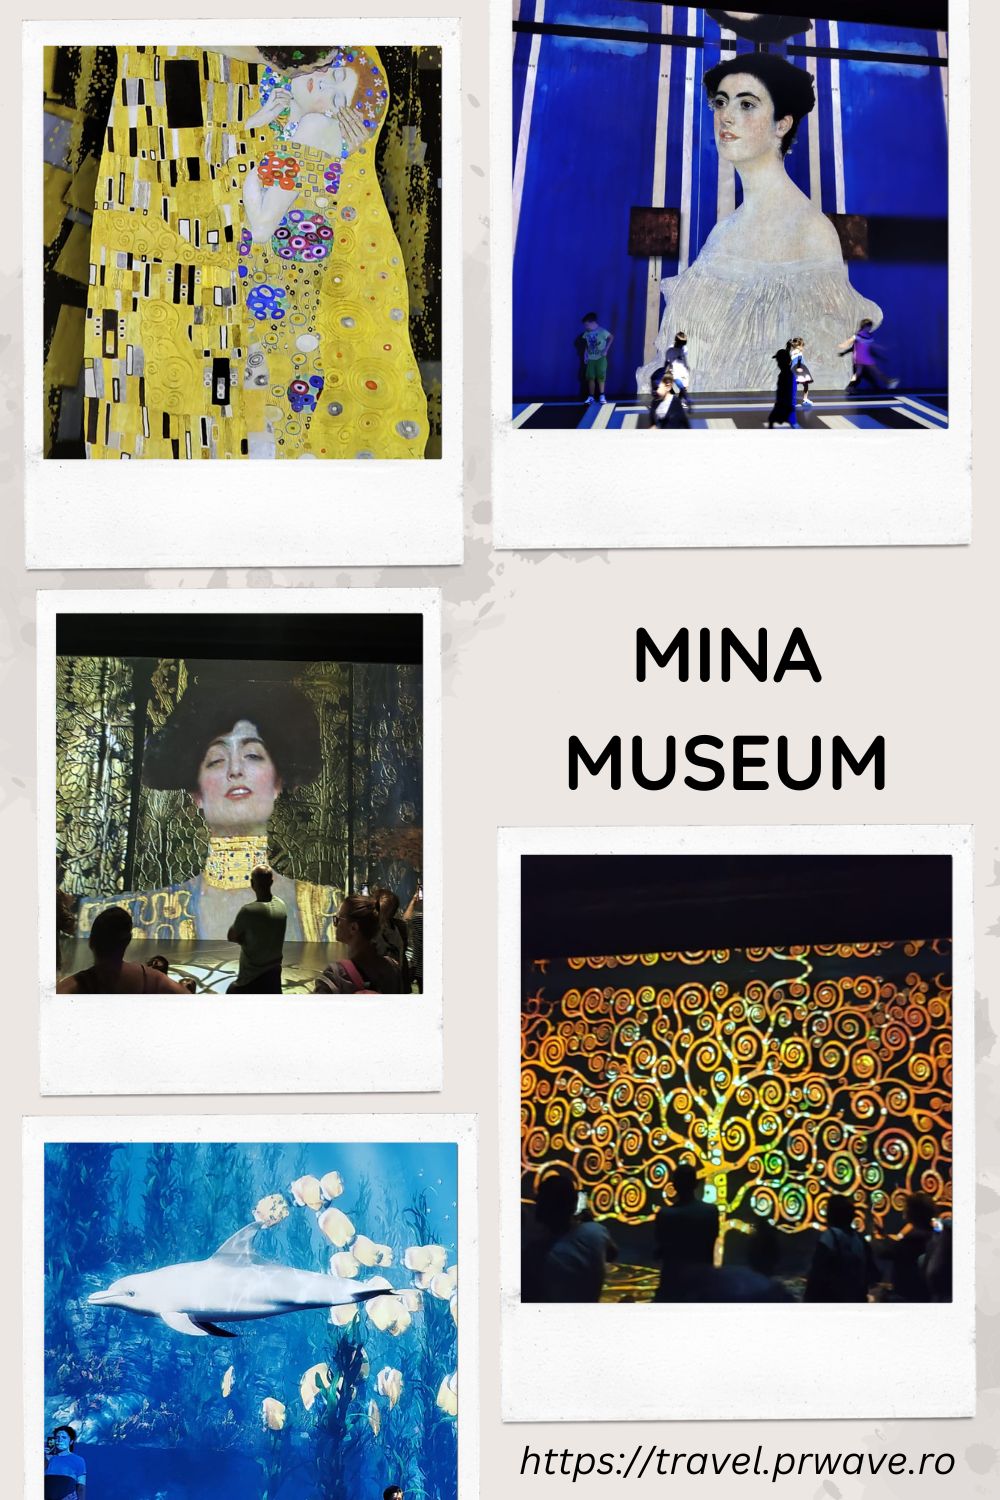 Mina Museum - visiting the of Immersive New Art Museum in Bucharest - MINA MUSEUM what it is like #minamuseum #immersiveart #artmuseum ##immersiveartmuseum #museums #europe #romania